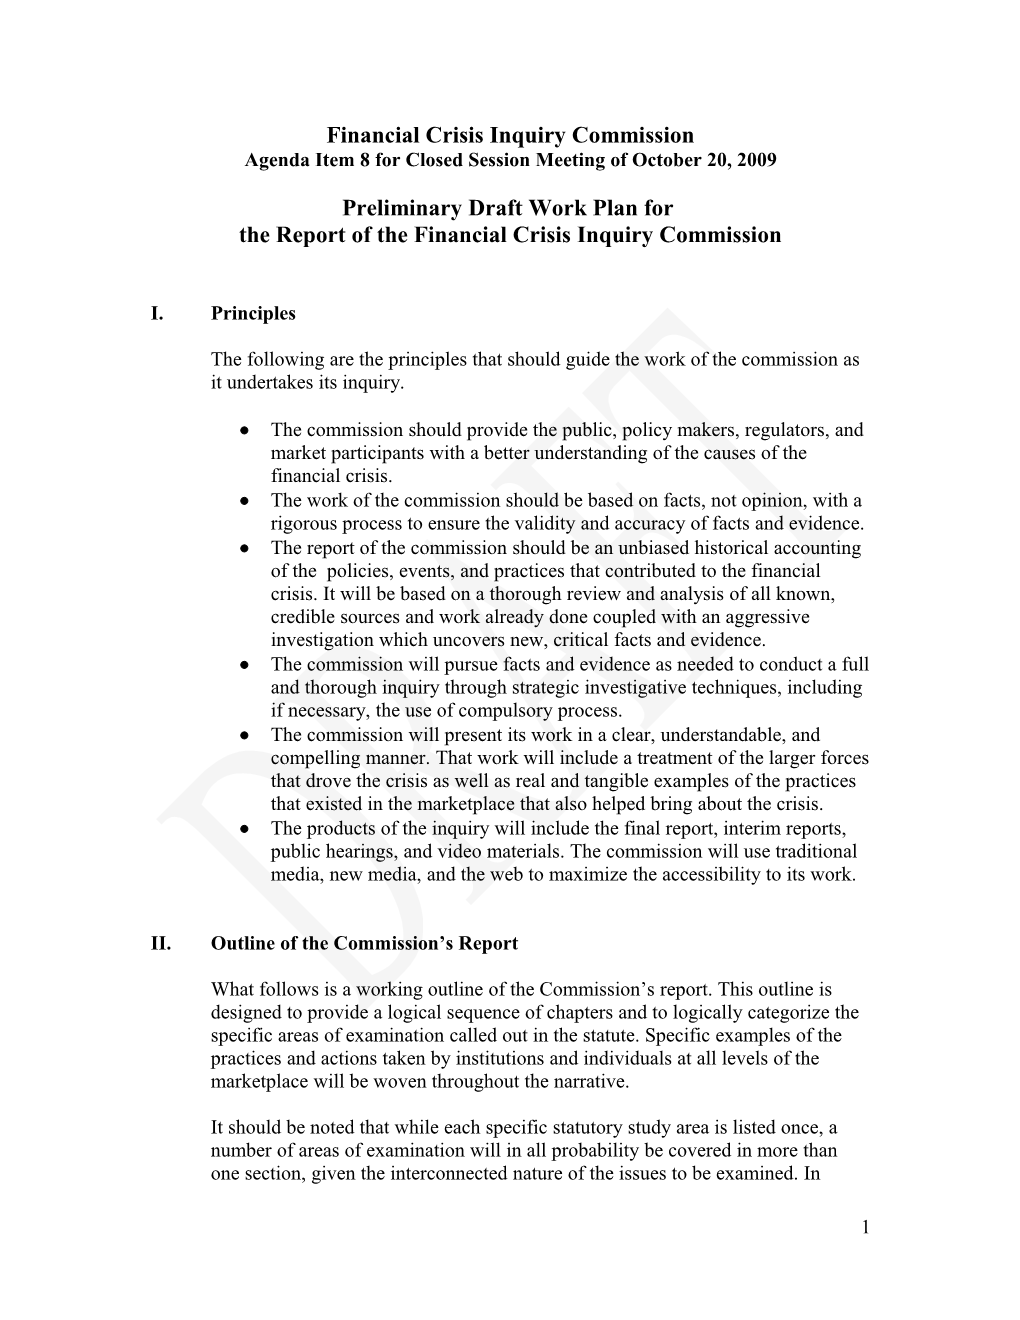 Preliminary Draft Work Plan for the Report of the Financial Crisis Inquiry Commission